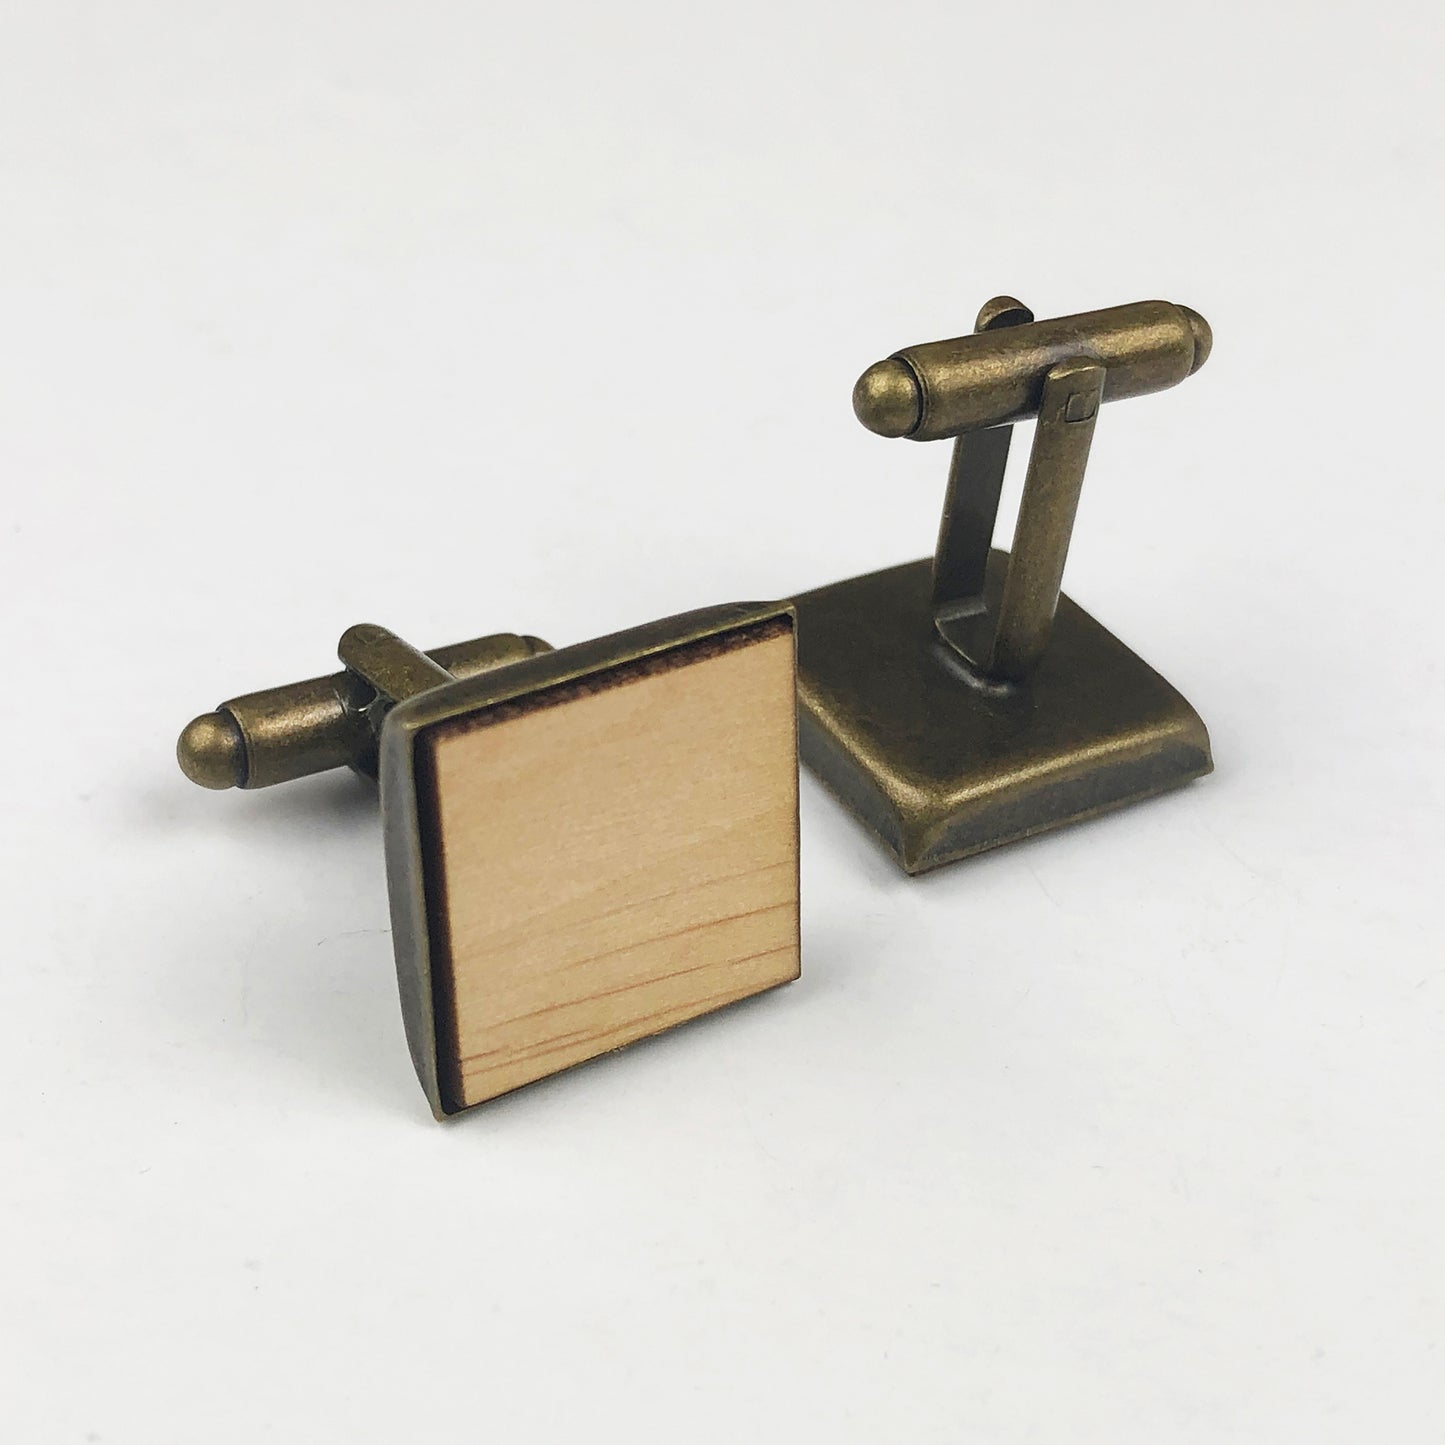 Square Initials Wooden Cufflinks with Wedding Role, Custom Names & Date